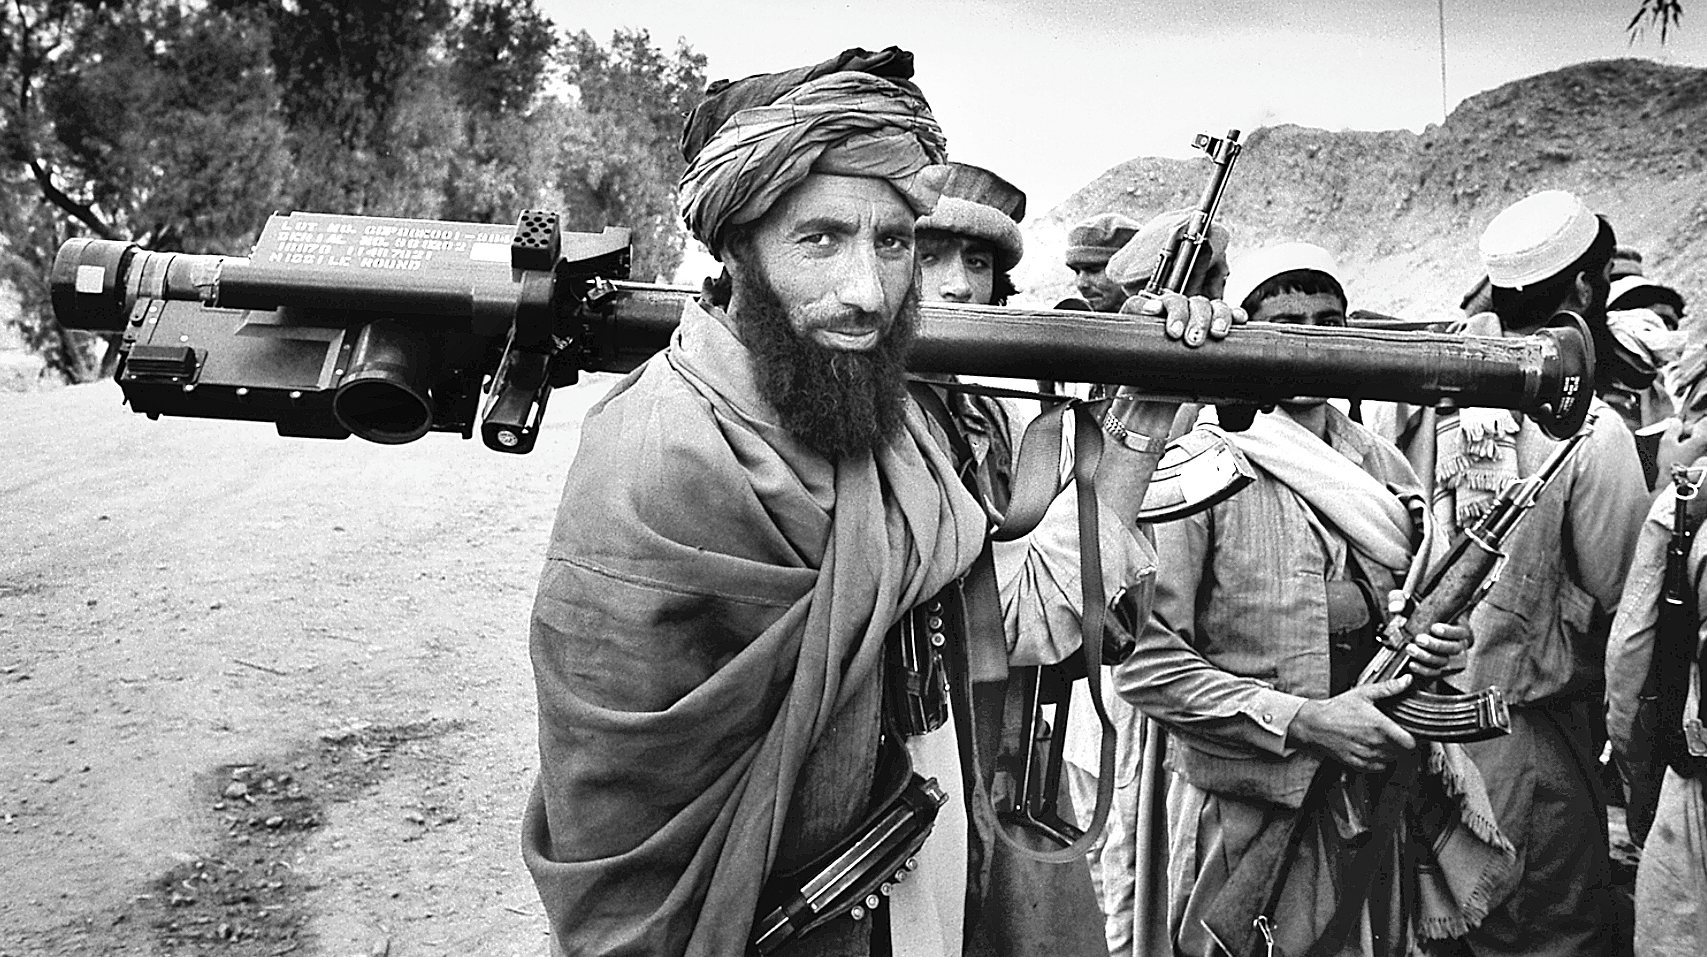 Afghan Mujahadeen fighter carries a U.S.-made shoulder-fired Stinger missile during the 1989 Jalalabad offensive in eastern Afghanistan. The weapon is capable of shooting down fast-moving aircraft by locking on to the heat signal generated by the engines.